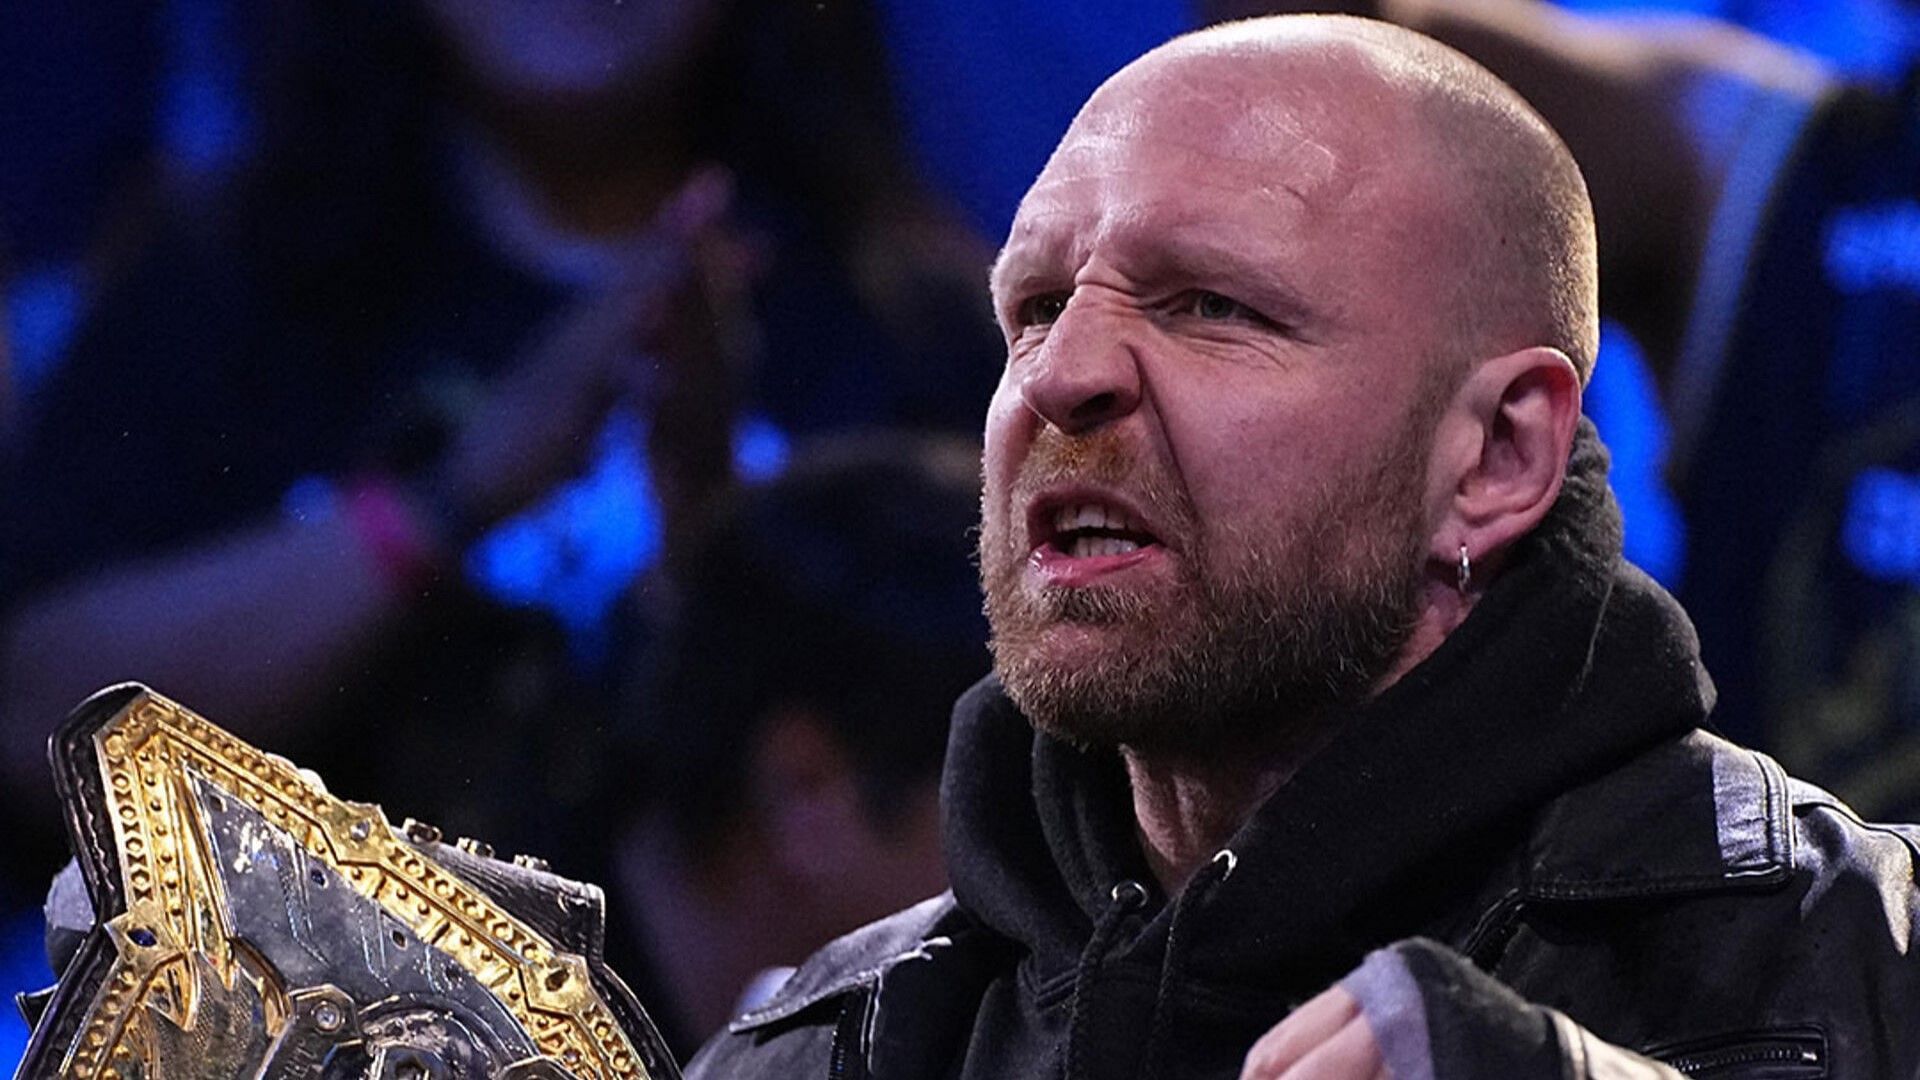 Jon Moxley on AEW Dynamite with the IWGP World Heavyweight Championship